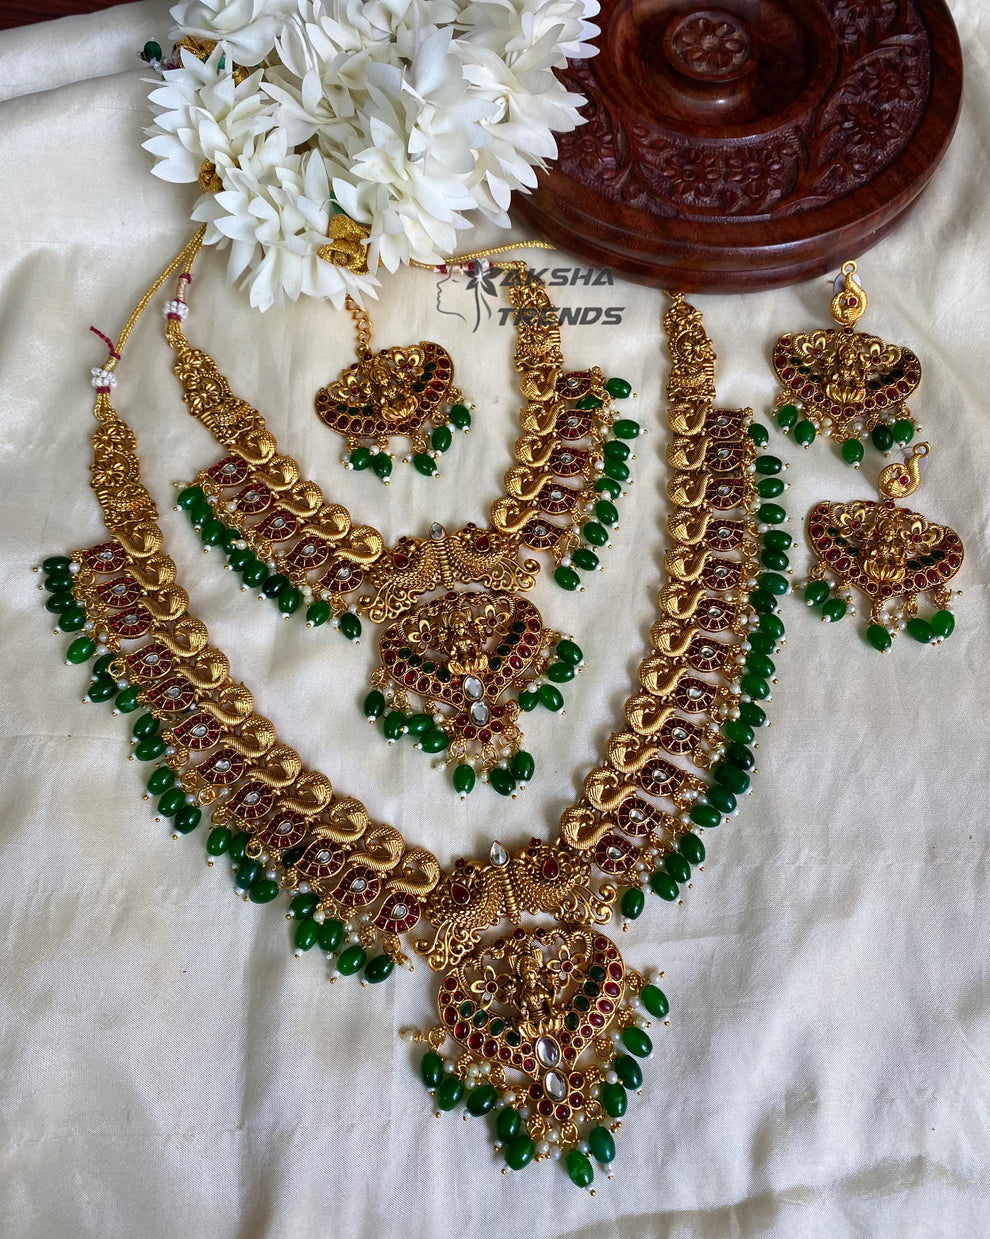 Grand peacock bridal combo with emerald beads Aksha Trends 